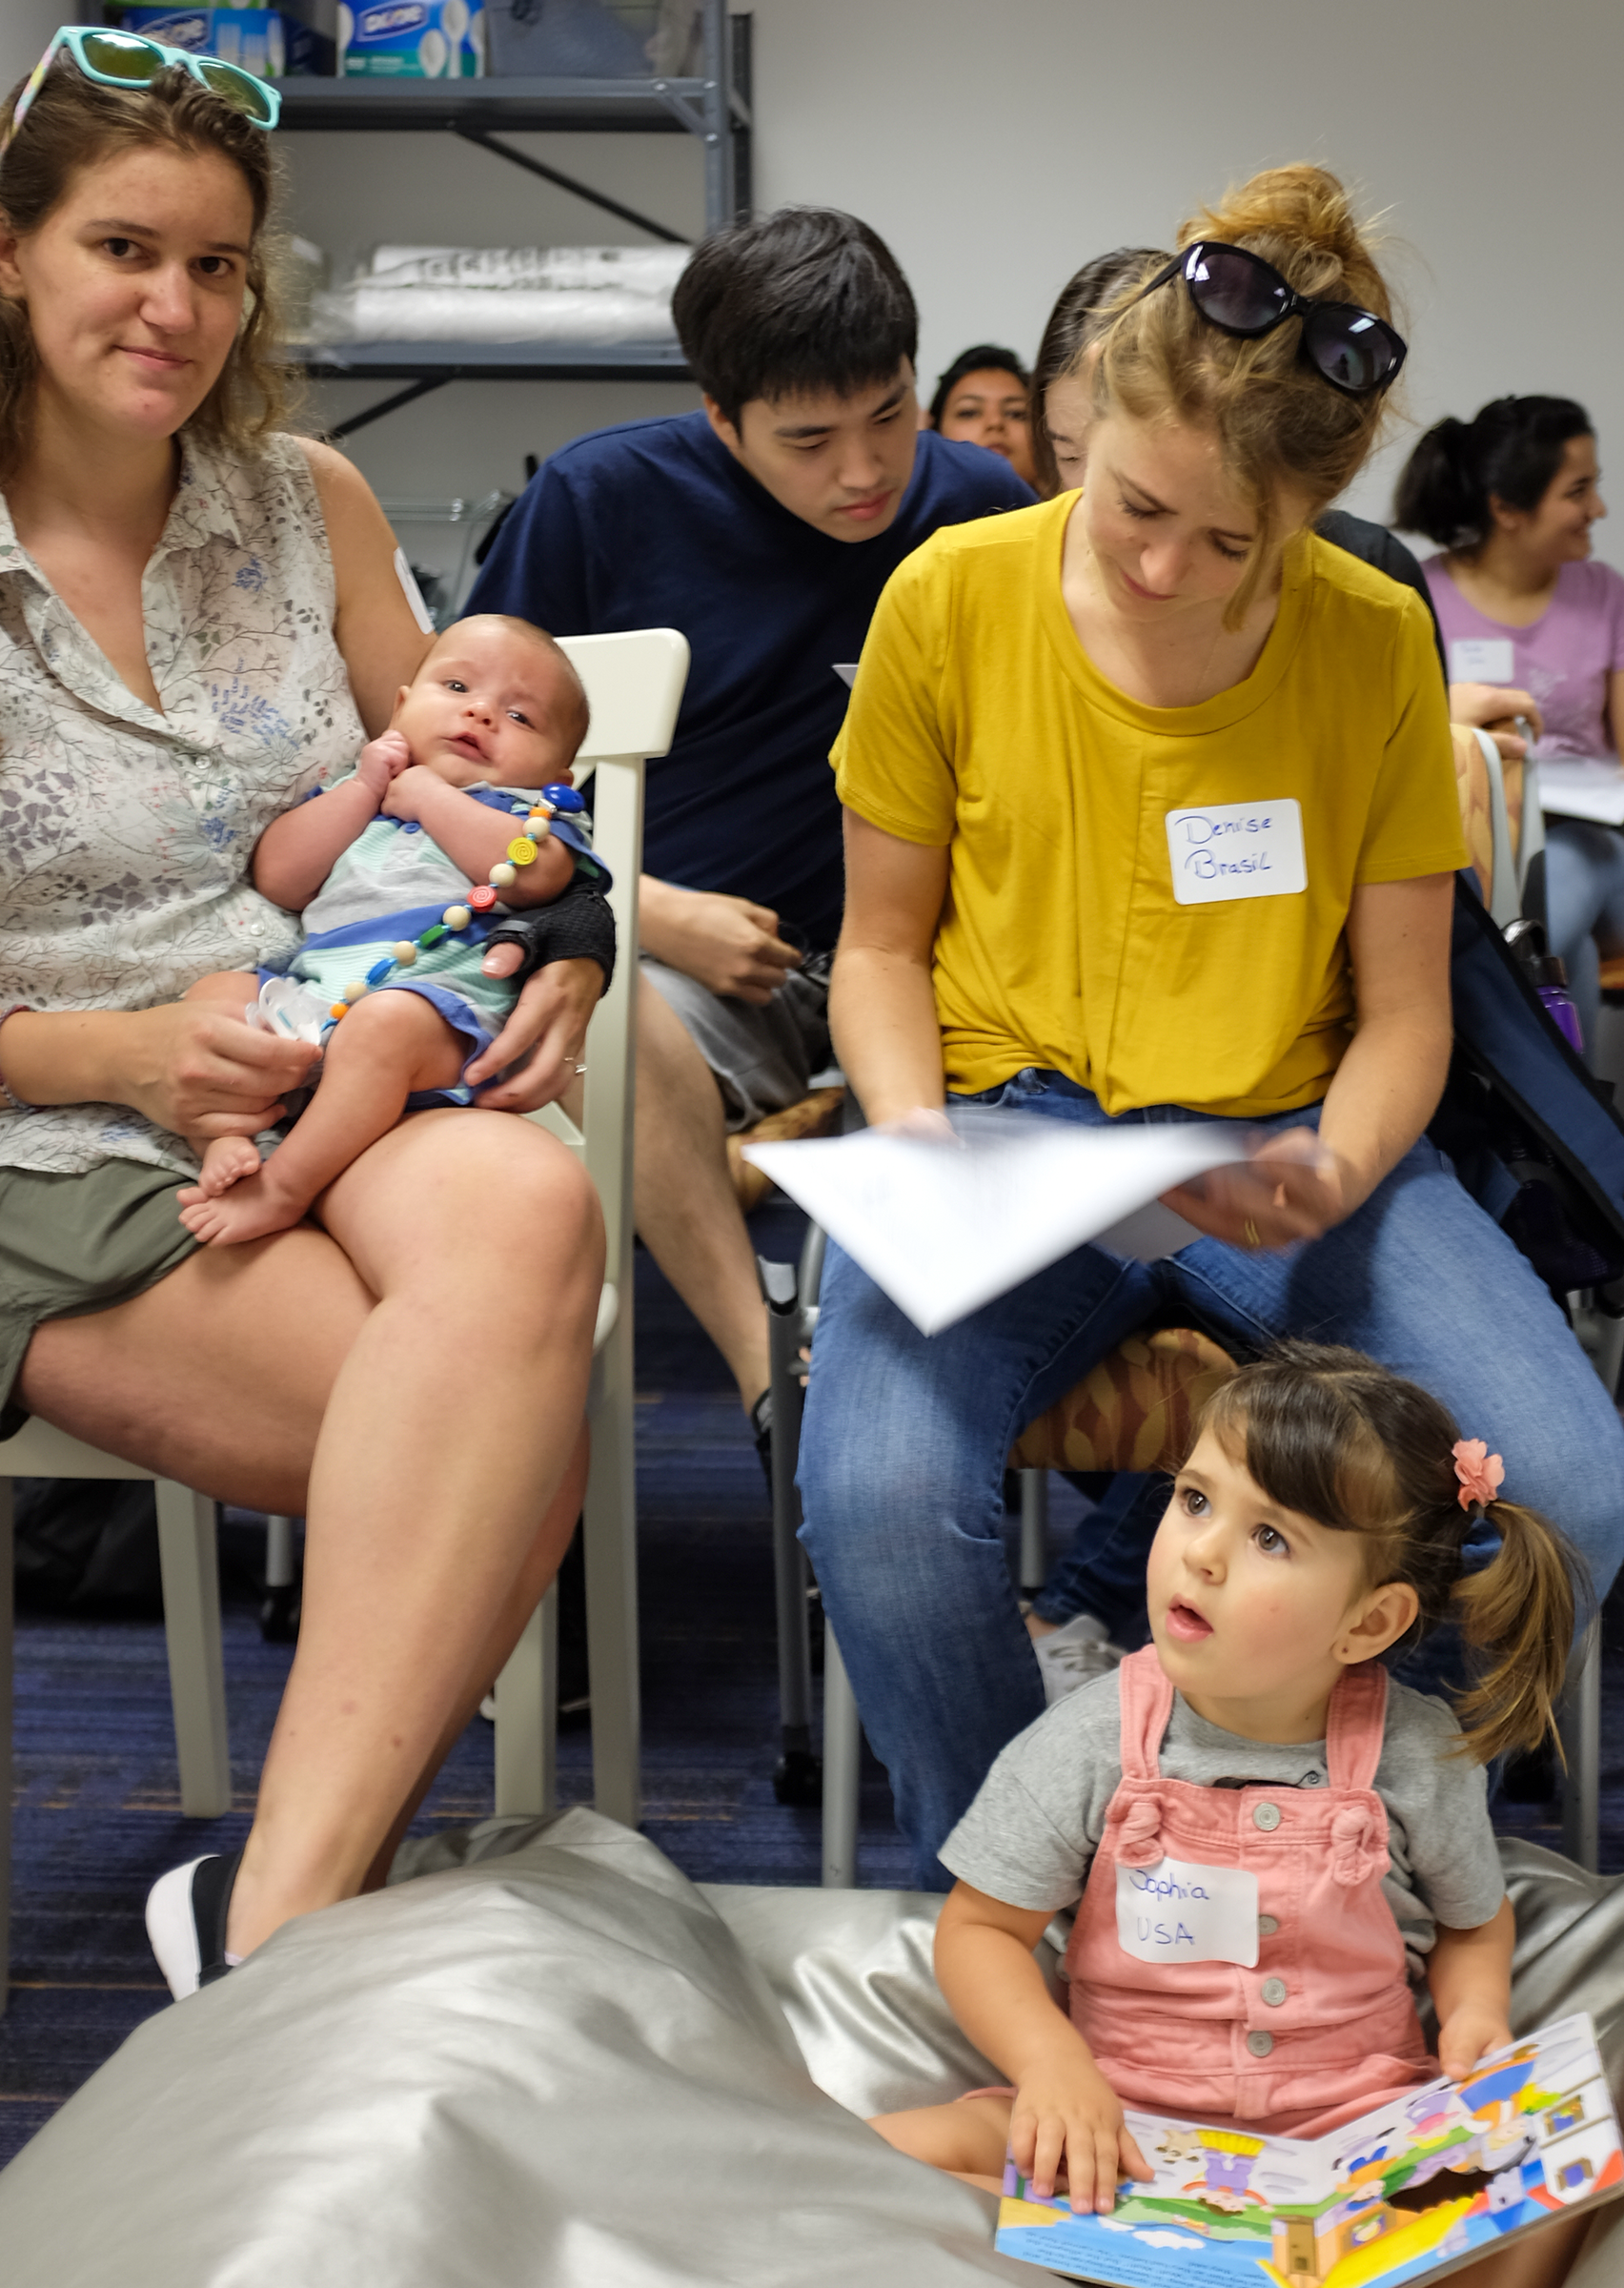 A woman holding a baby, another writing on a paper and a little girl reading a book sitting on a pillow on the floor.